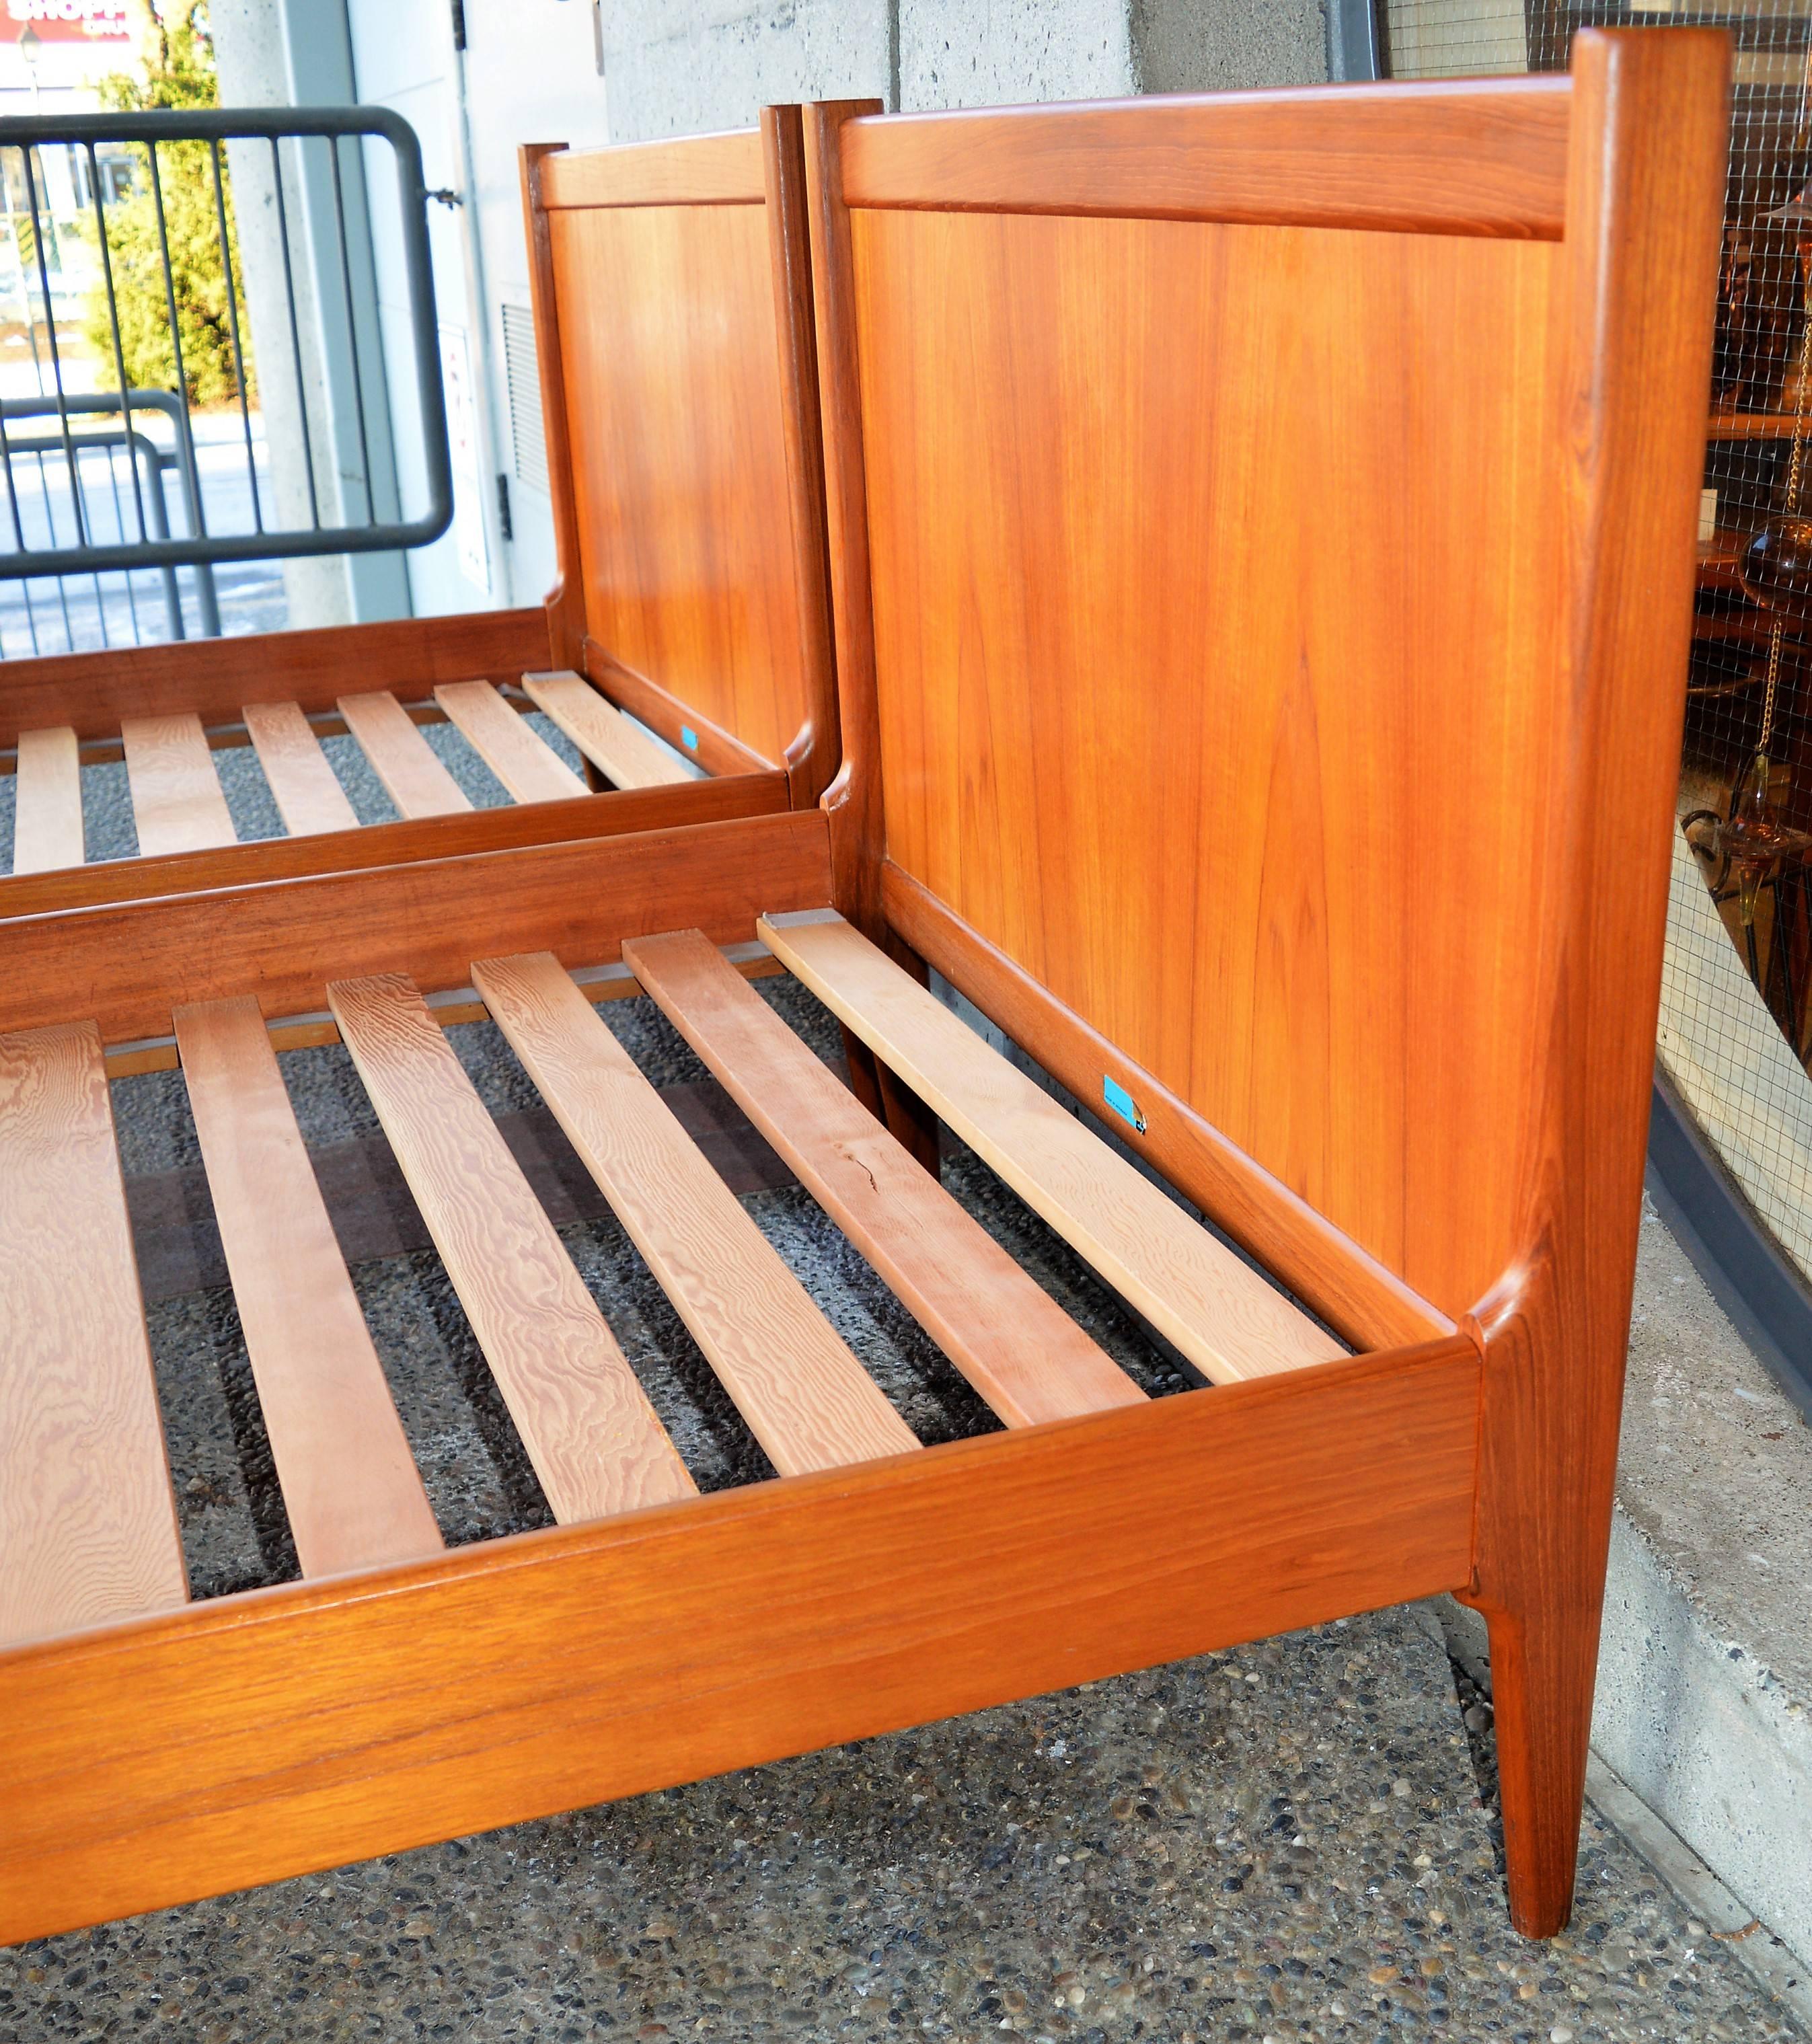 This lovely pair of quality Danish Modern teak twin sized bed frames were made by Dyrlund in the 1960s and disassemble for easy transport, using quality heavy metal toothed connectors and steel plates. Note the sculptural detailing around the side